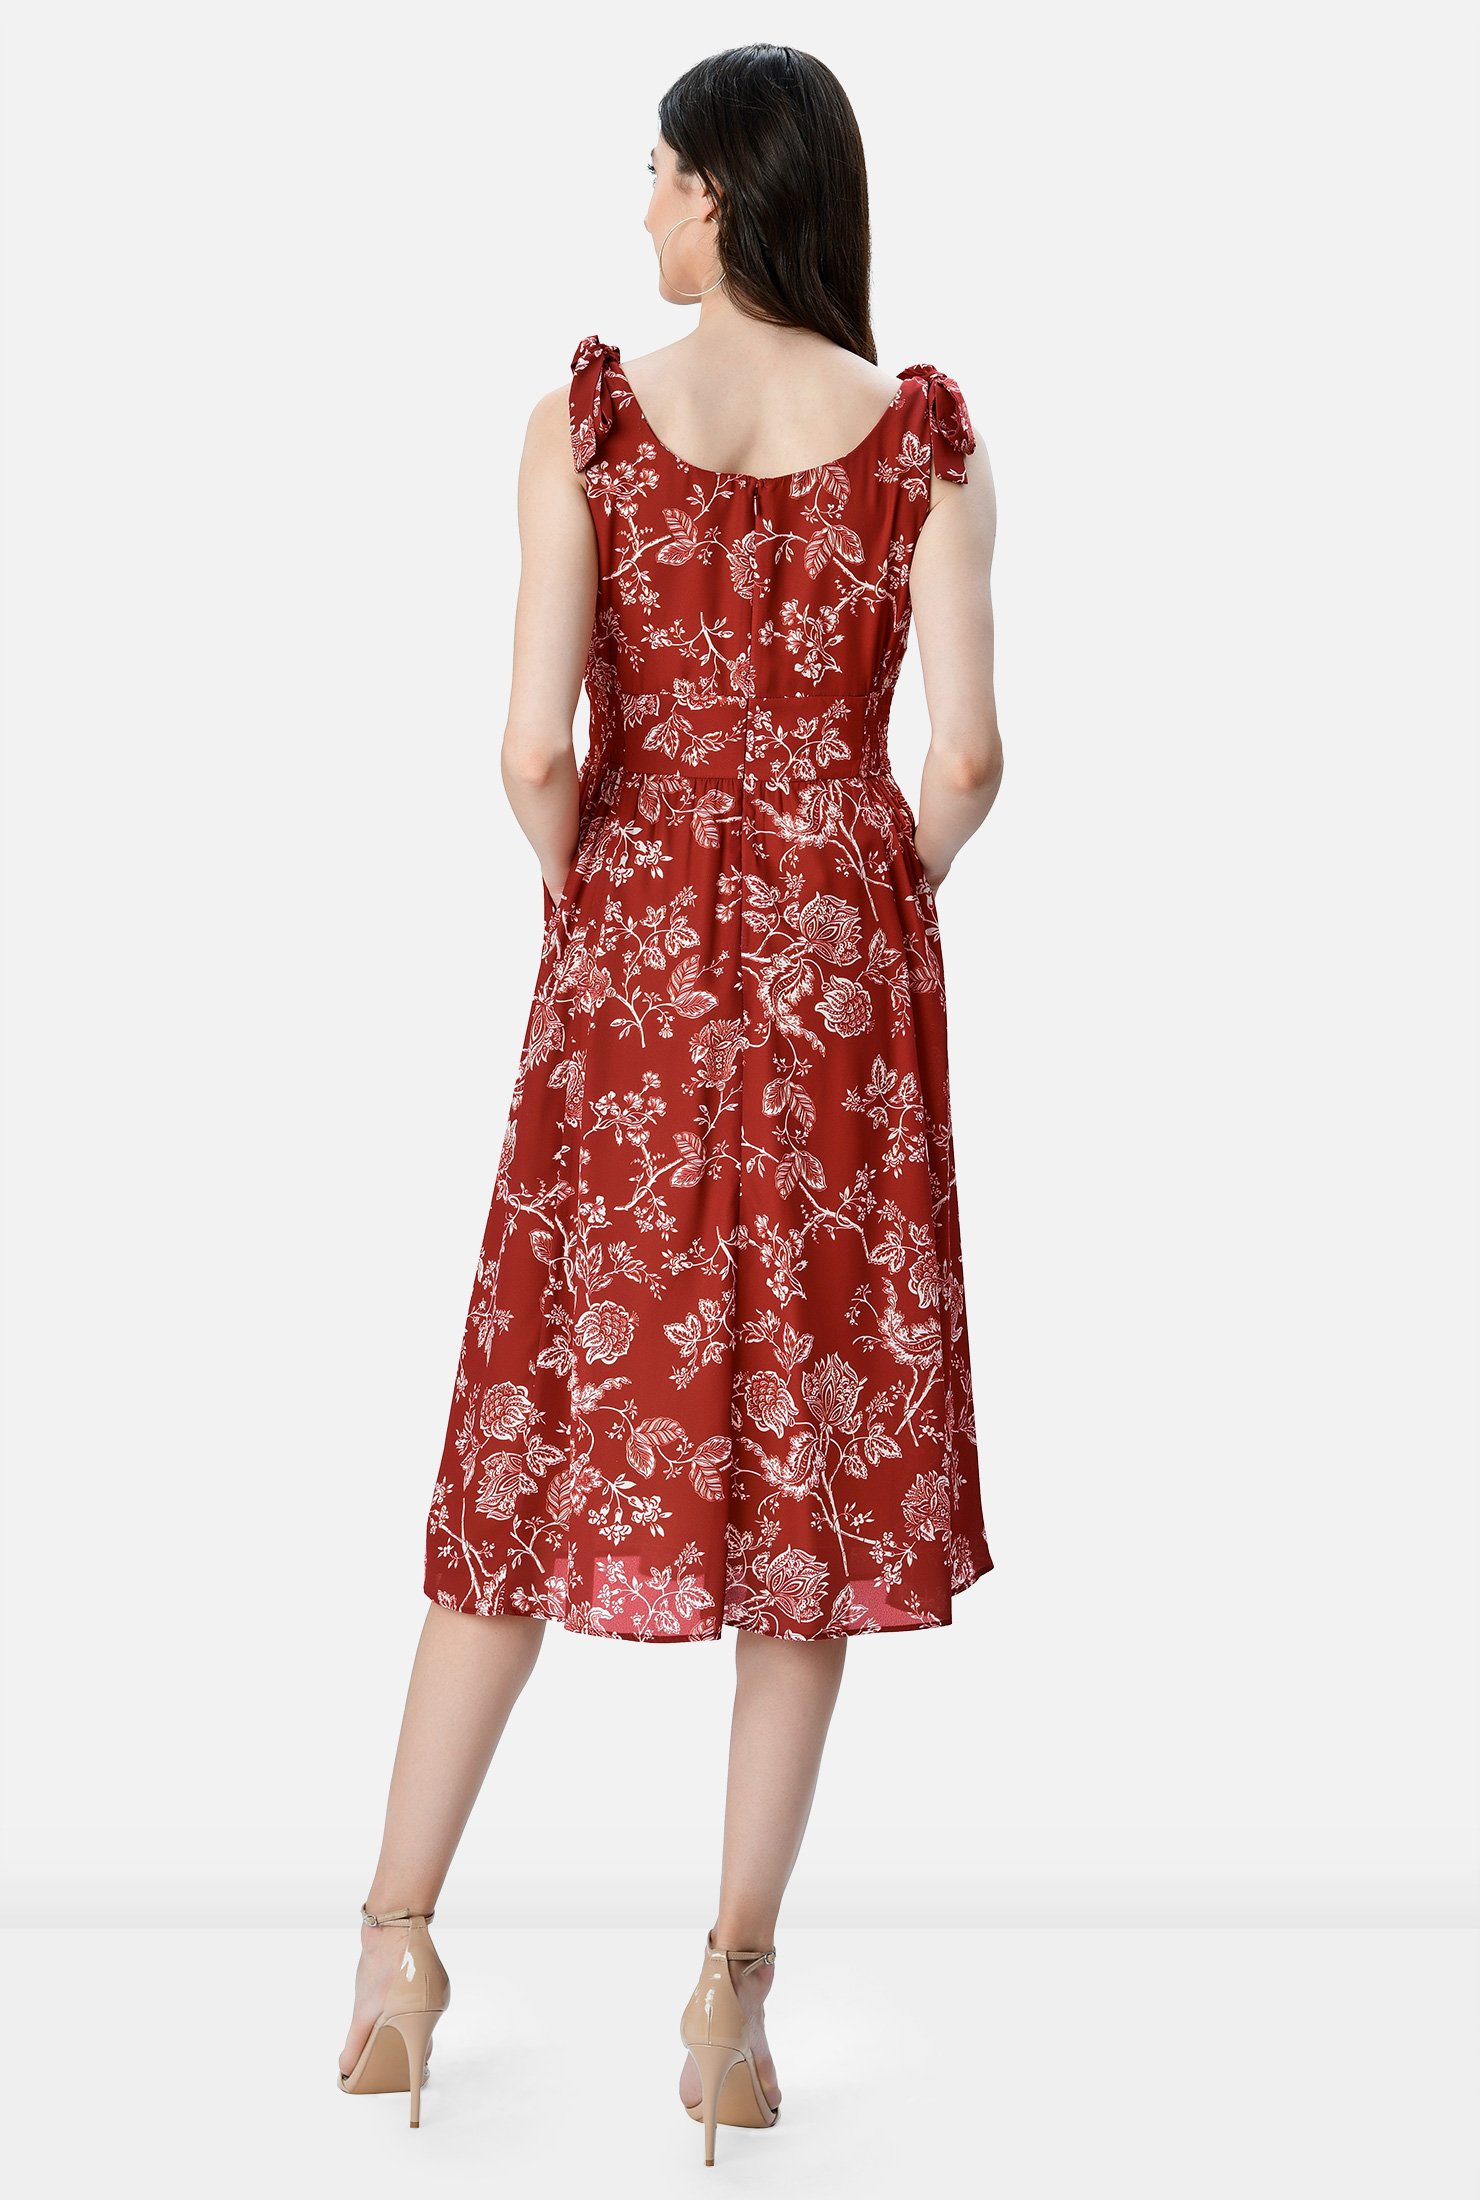 Our floral print crepe dress is designed to flatter and enhance with an angled pleat surplice bodice, banded empire waist and ruched pleat full skirt.